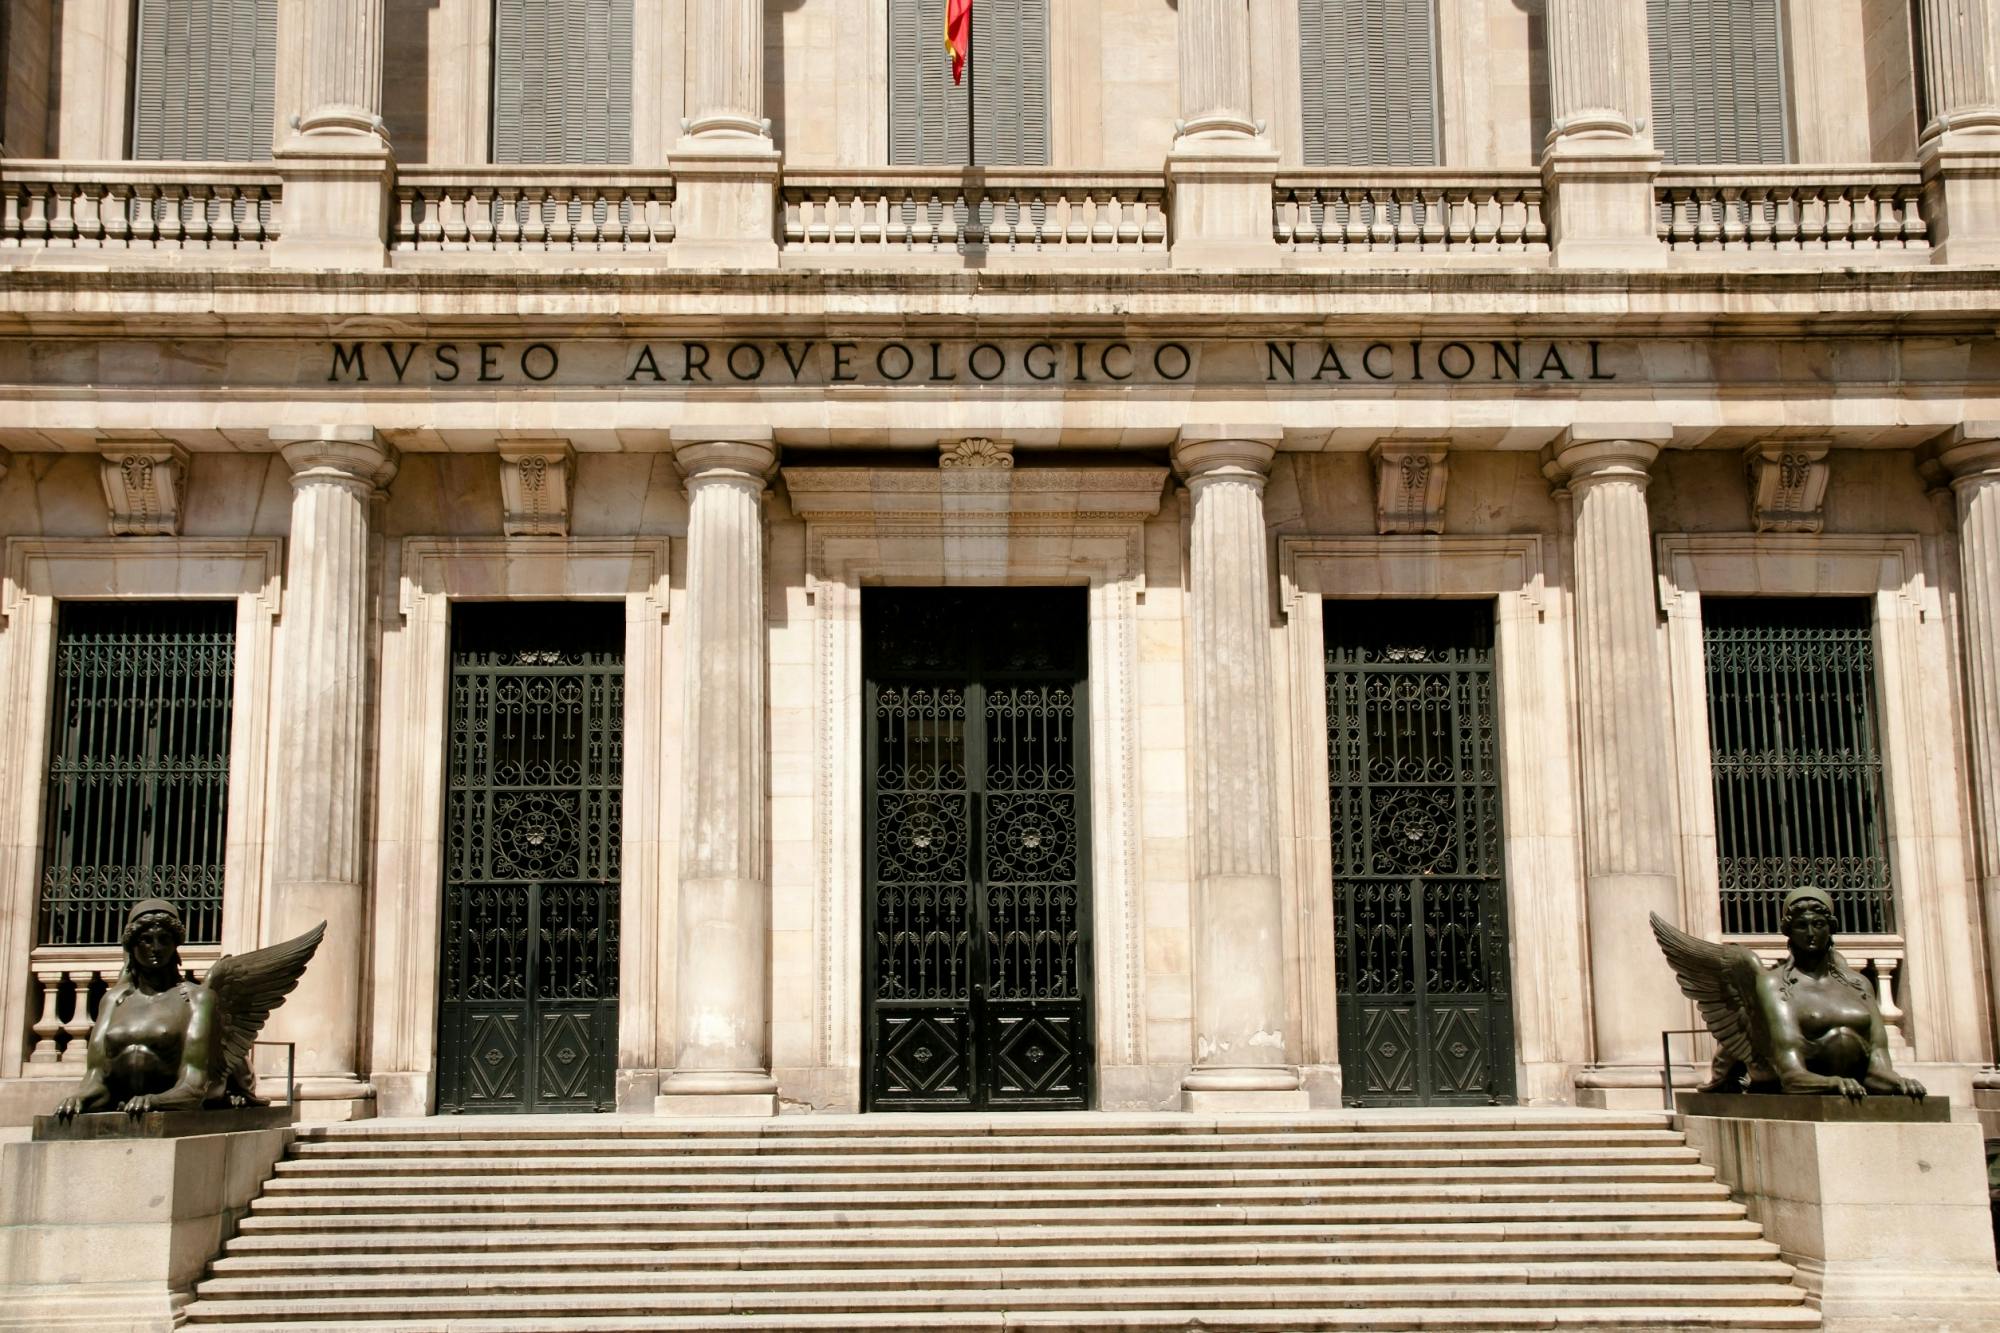 Archaeological Museum of Madrid skip-the-line ticket with audio tour Musement